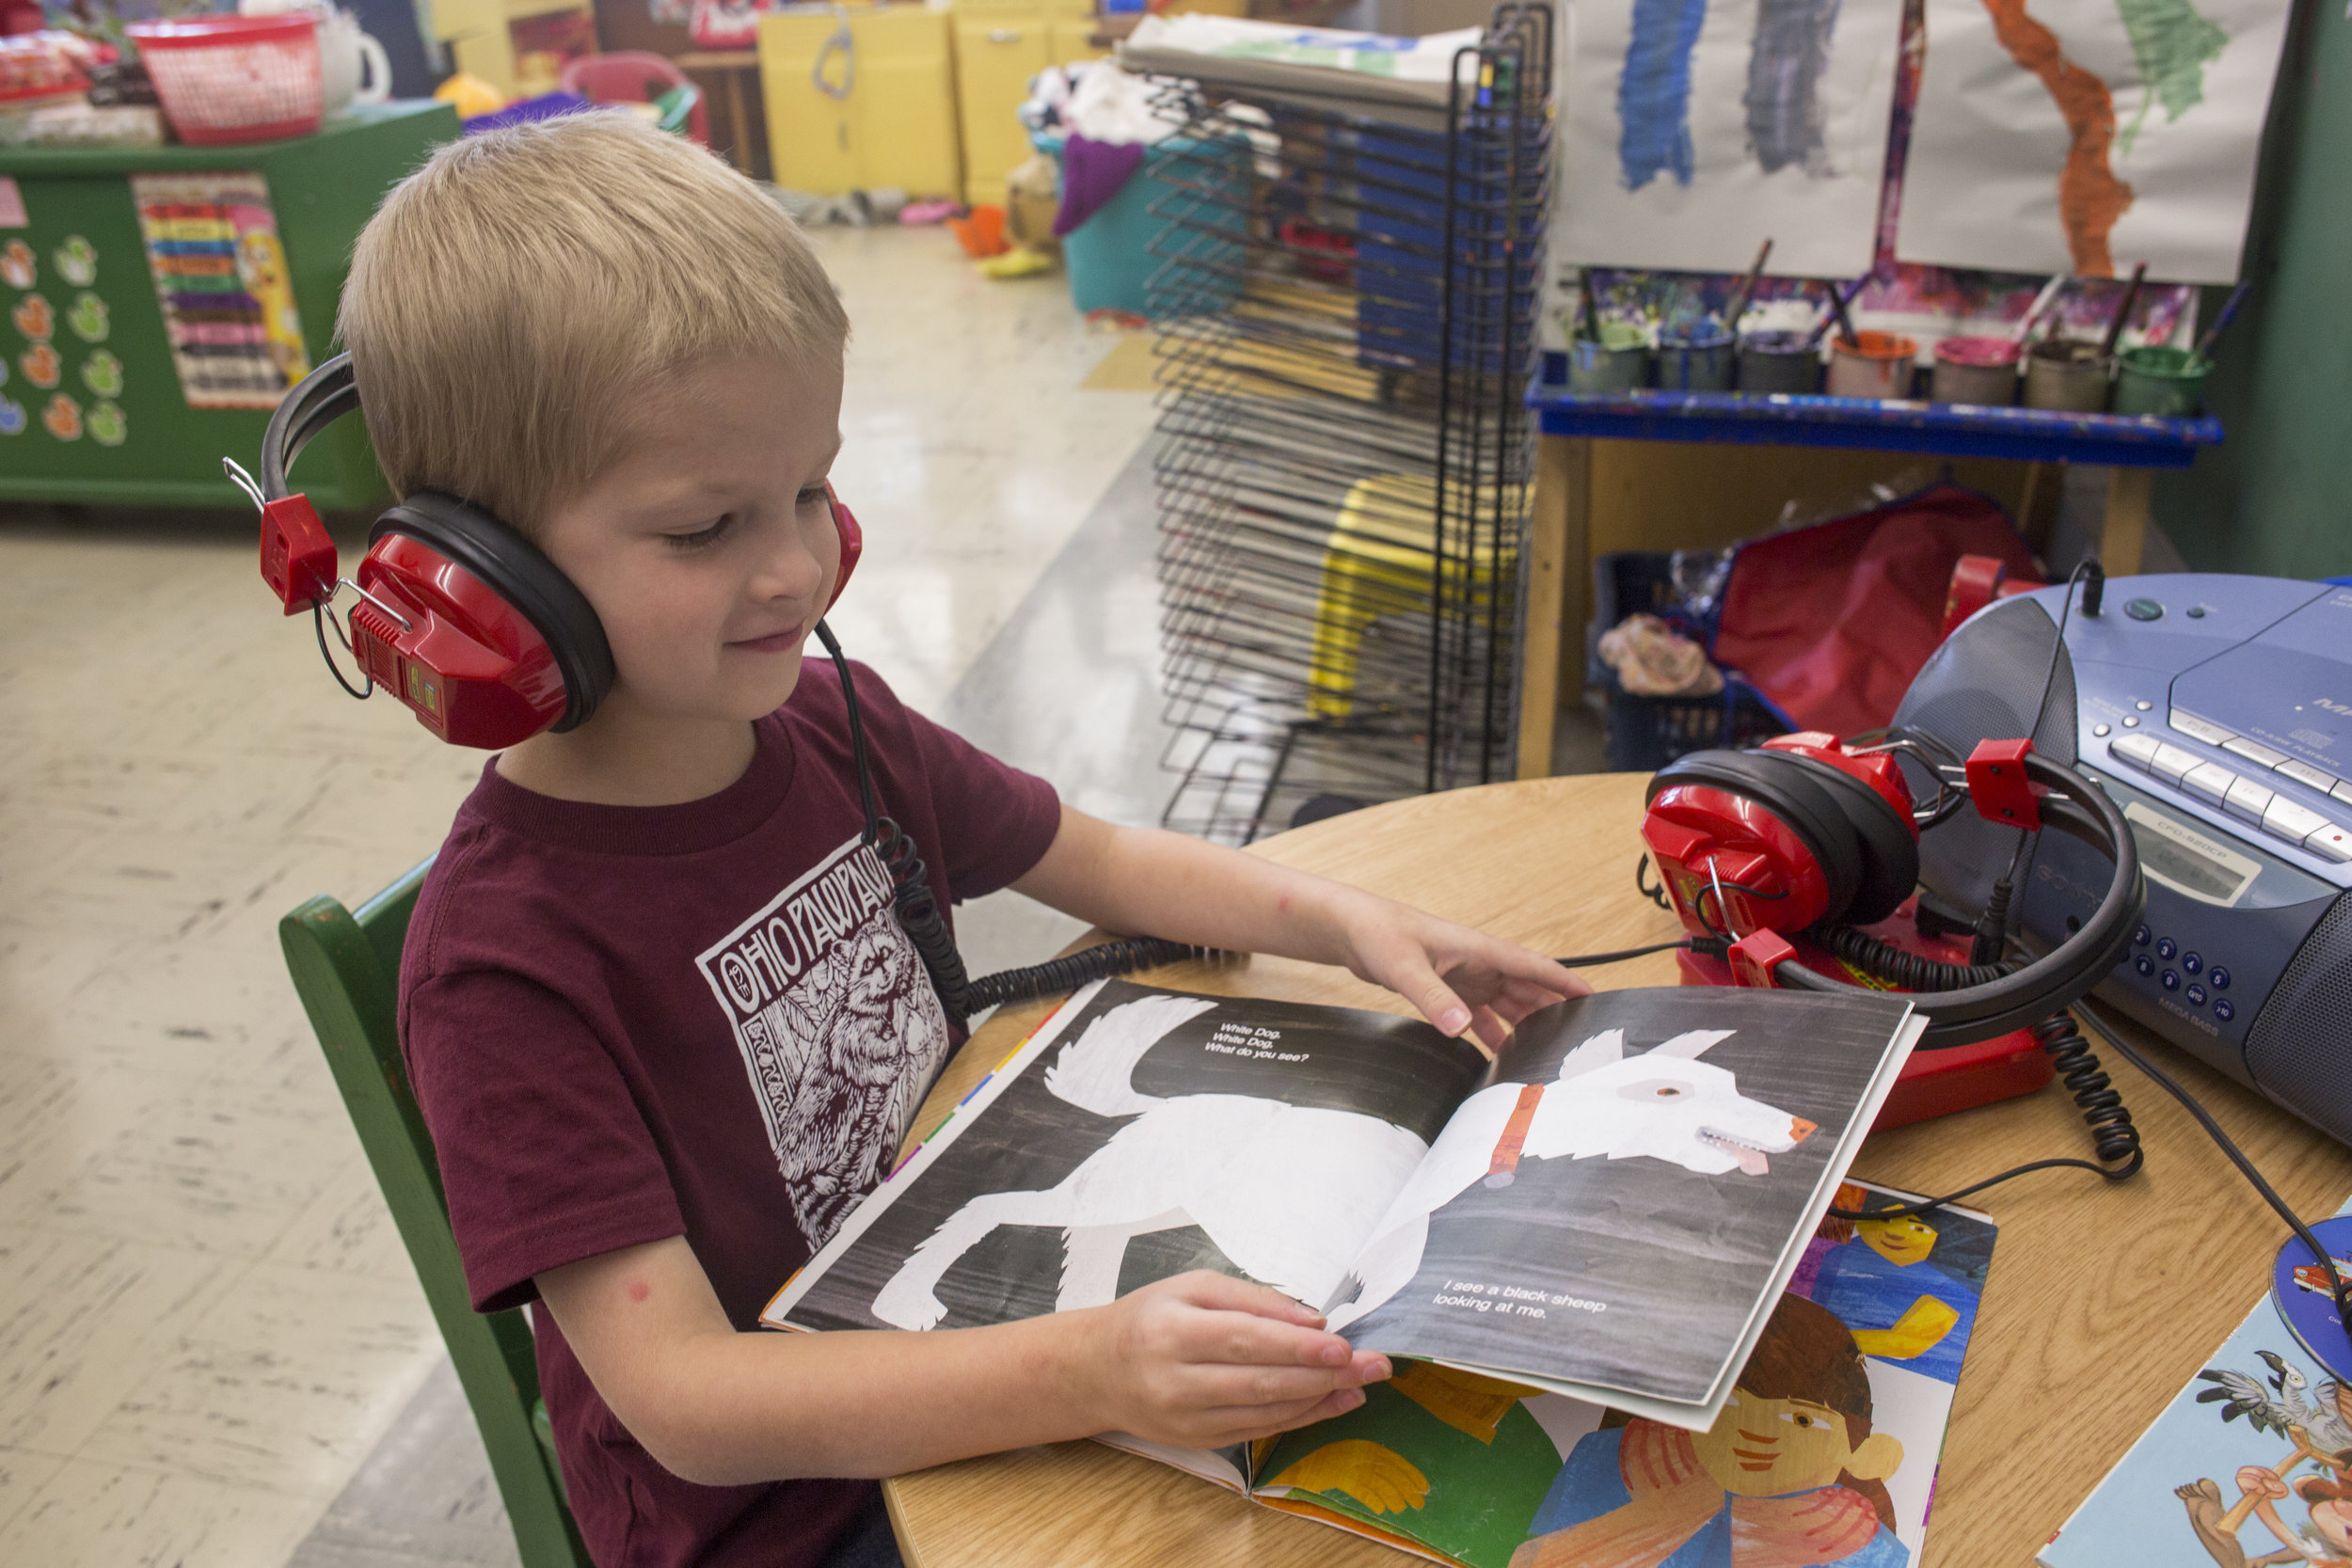  Josiah pauses to look at a picture of a dog while flipping through and listening to the book Brown Bear, Brown Bear, What Do You See? in his kindergarten class. 